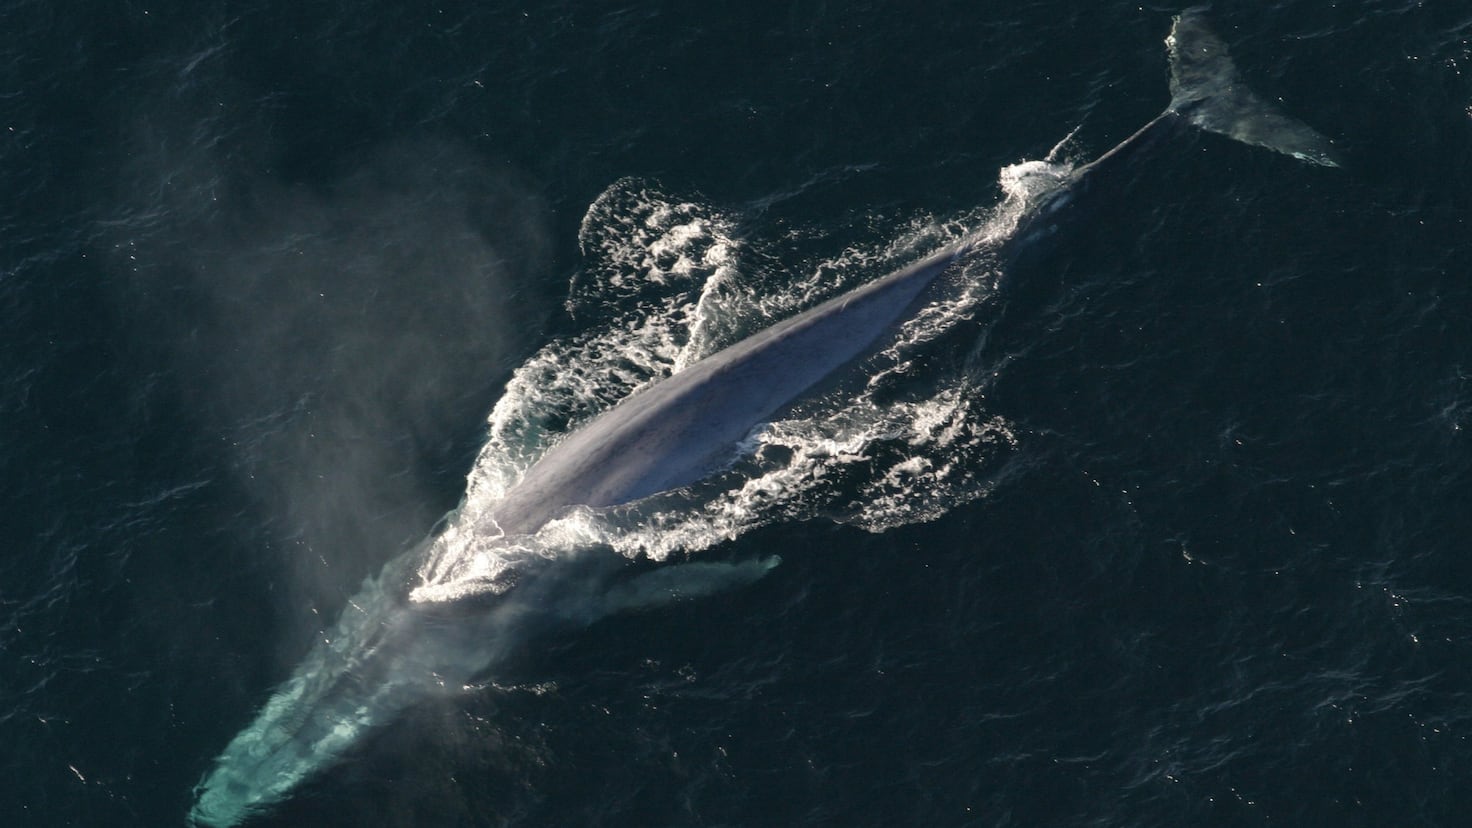 The song of whales that could indicate a resurgence in the Antarctic
